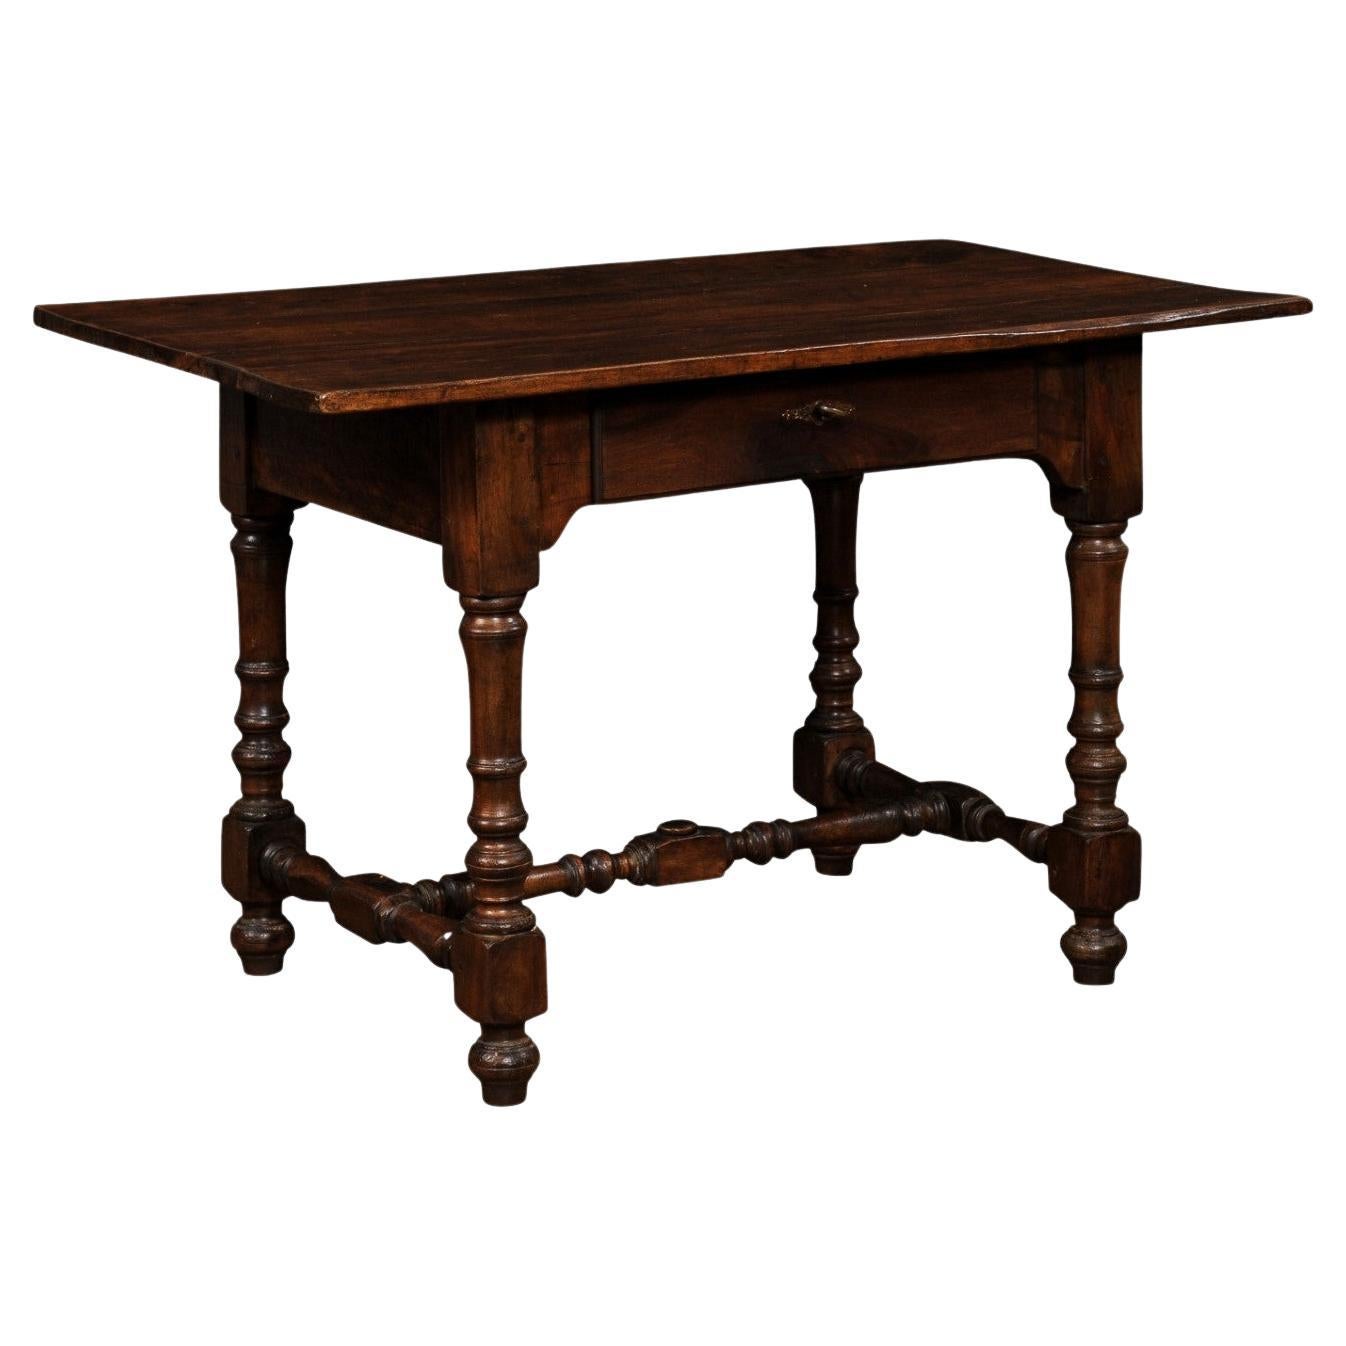 French Louis XIII Style 19th Century Walnut Table with Turned Legs and Stretcher For Sale